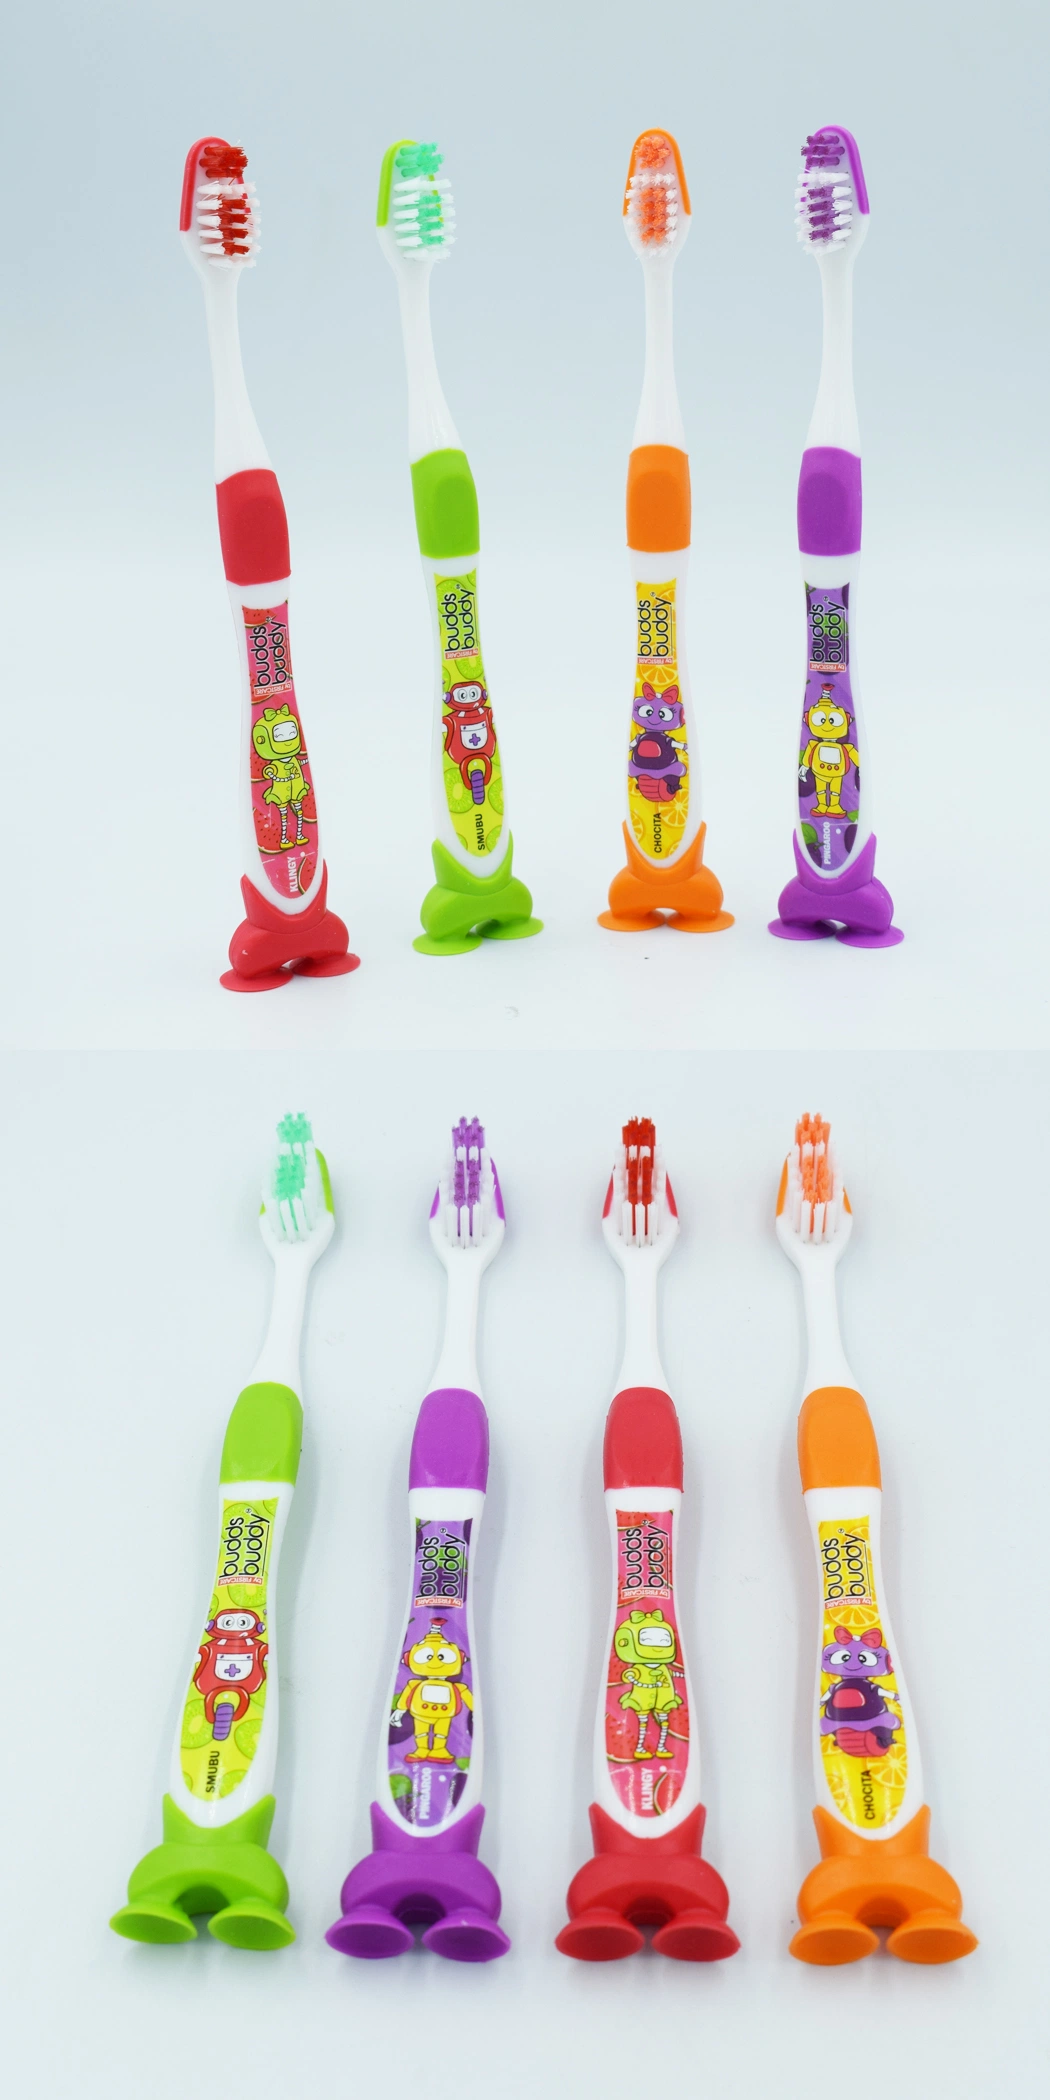 OEM Soft Bristle Suction Cup Stand Colorful Children Kids Toothbrush